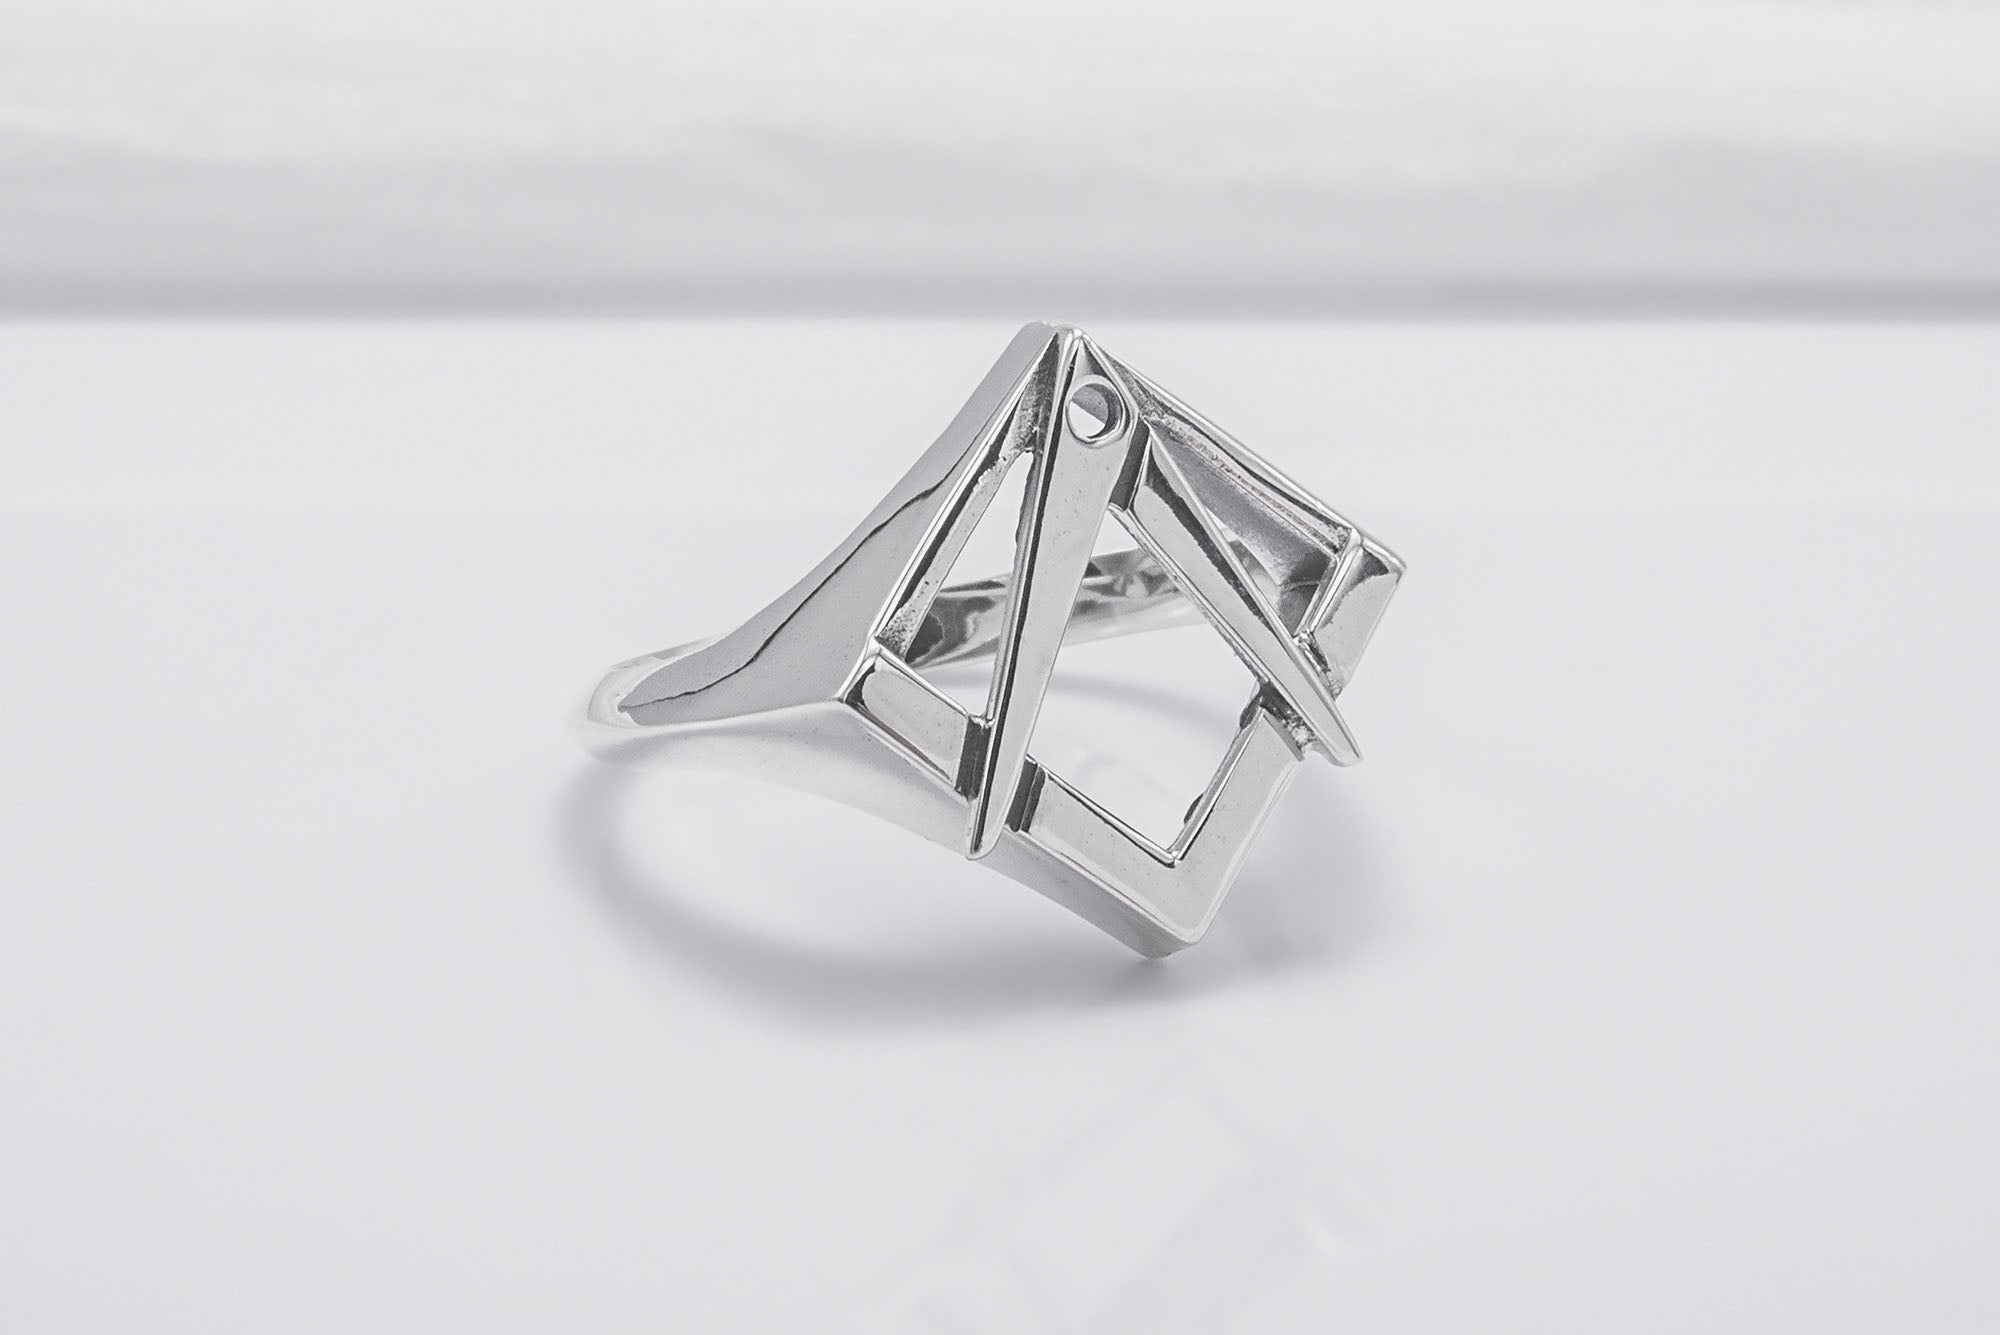 Sterling Silver Square and Compasses Ring, Handmade Mason Jewelry